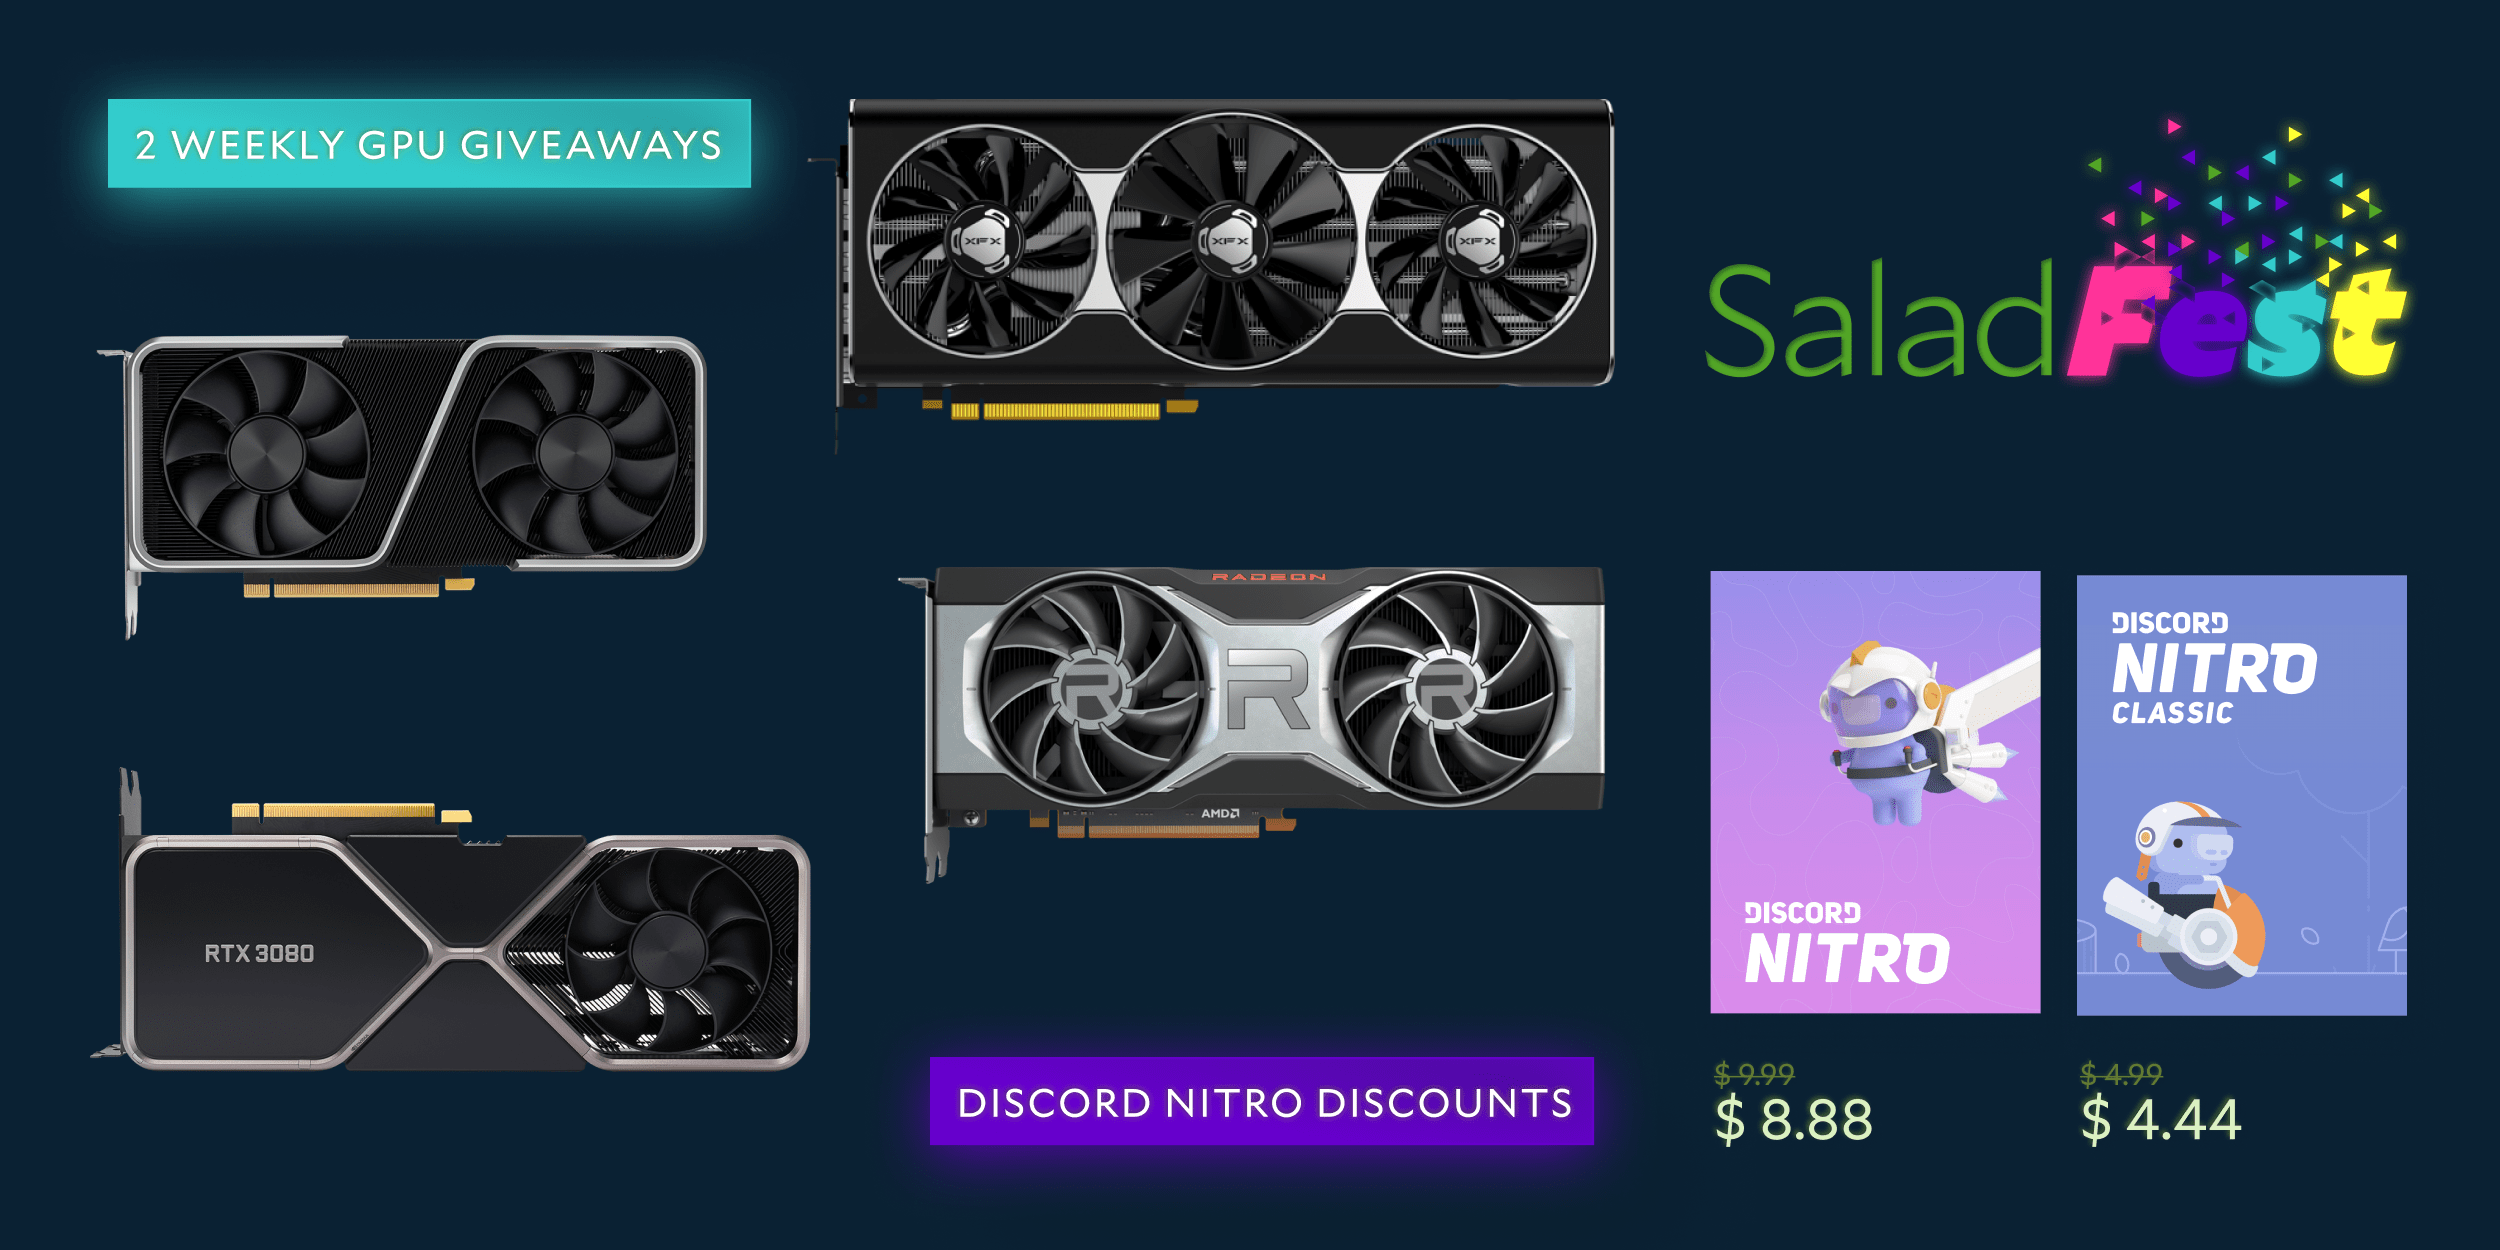 SaladFest 2022 featuring weekly GPU giveaways and discounted Discord Nitro